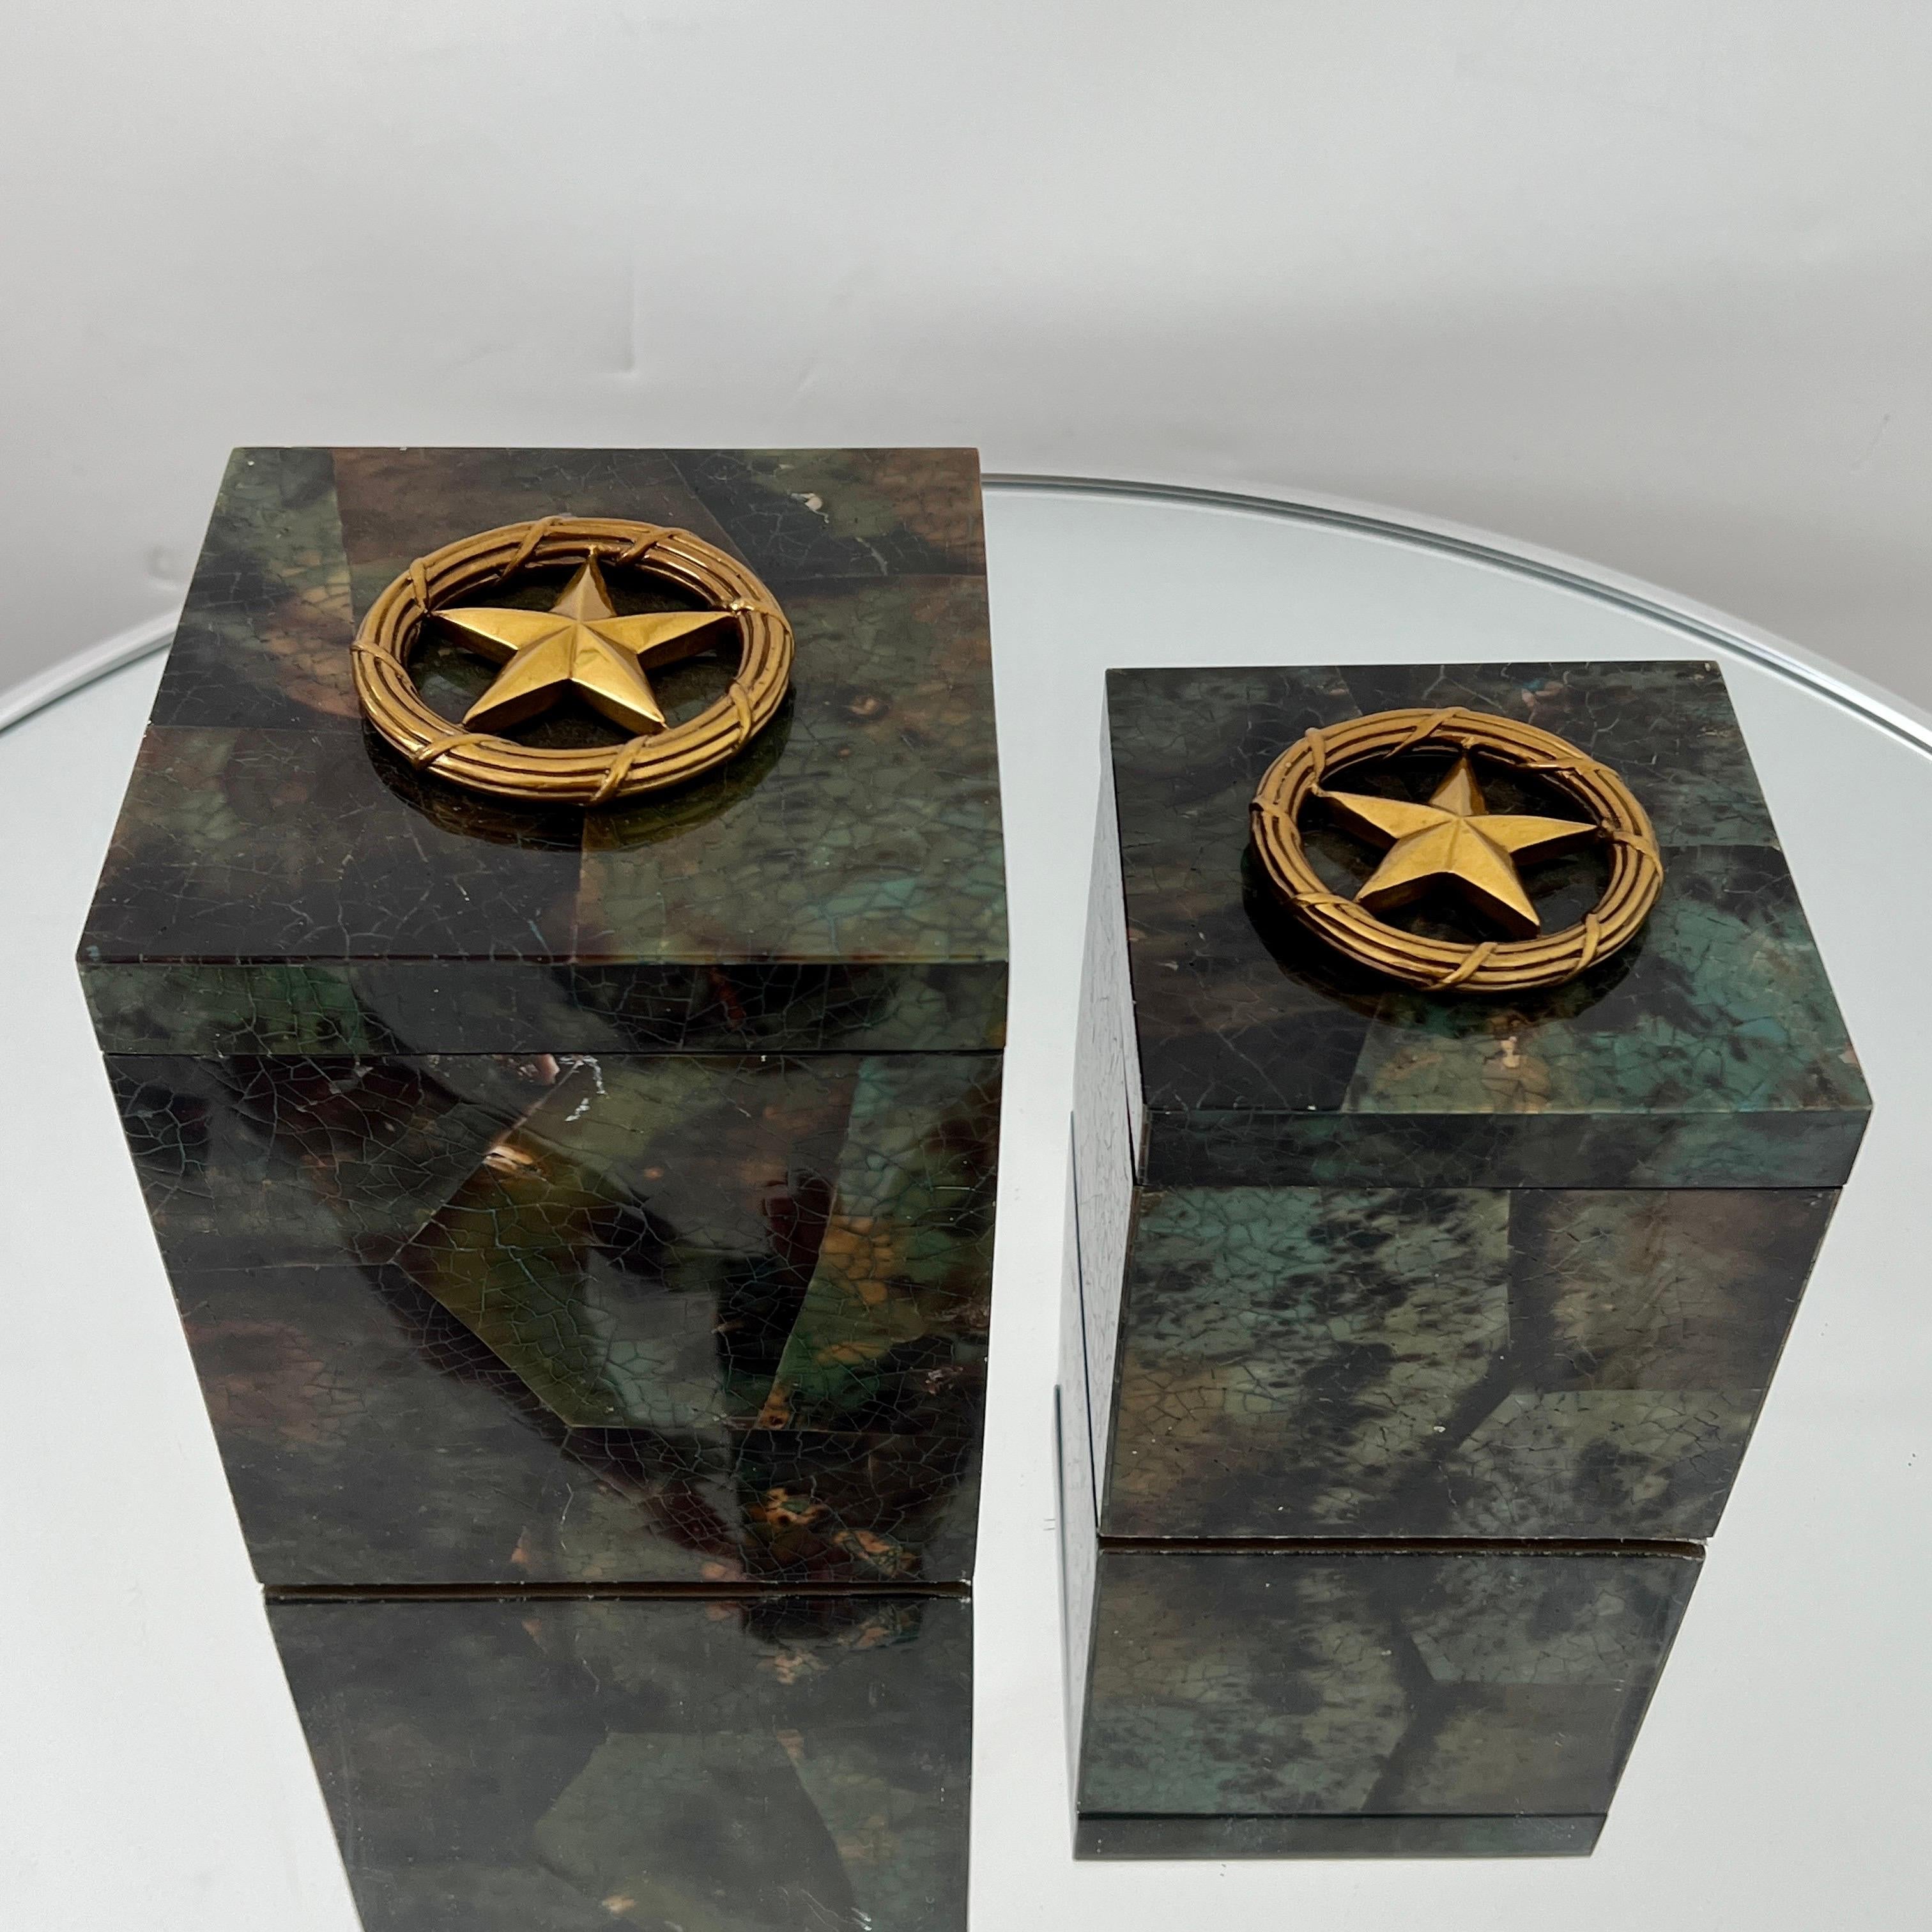 Pair of decorative boxes all handcrafted in exotic materials featuring lacquered and hand dyed pen-shell over a wood frame. The boxes feature mosaic shell inlays in beautiful hues of turquoise, green, black and brown. Fitted with brass stars accents